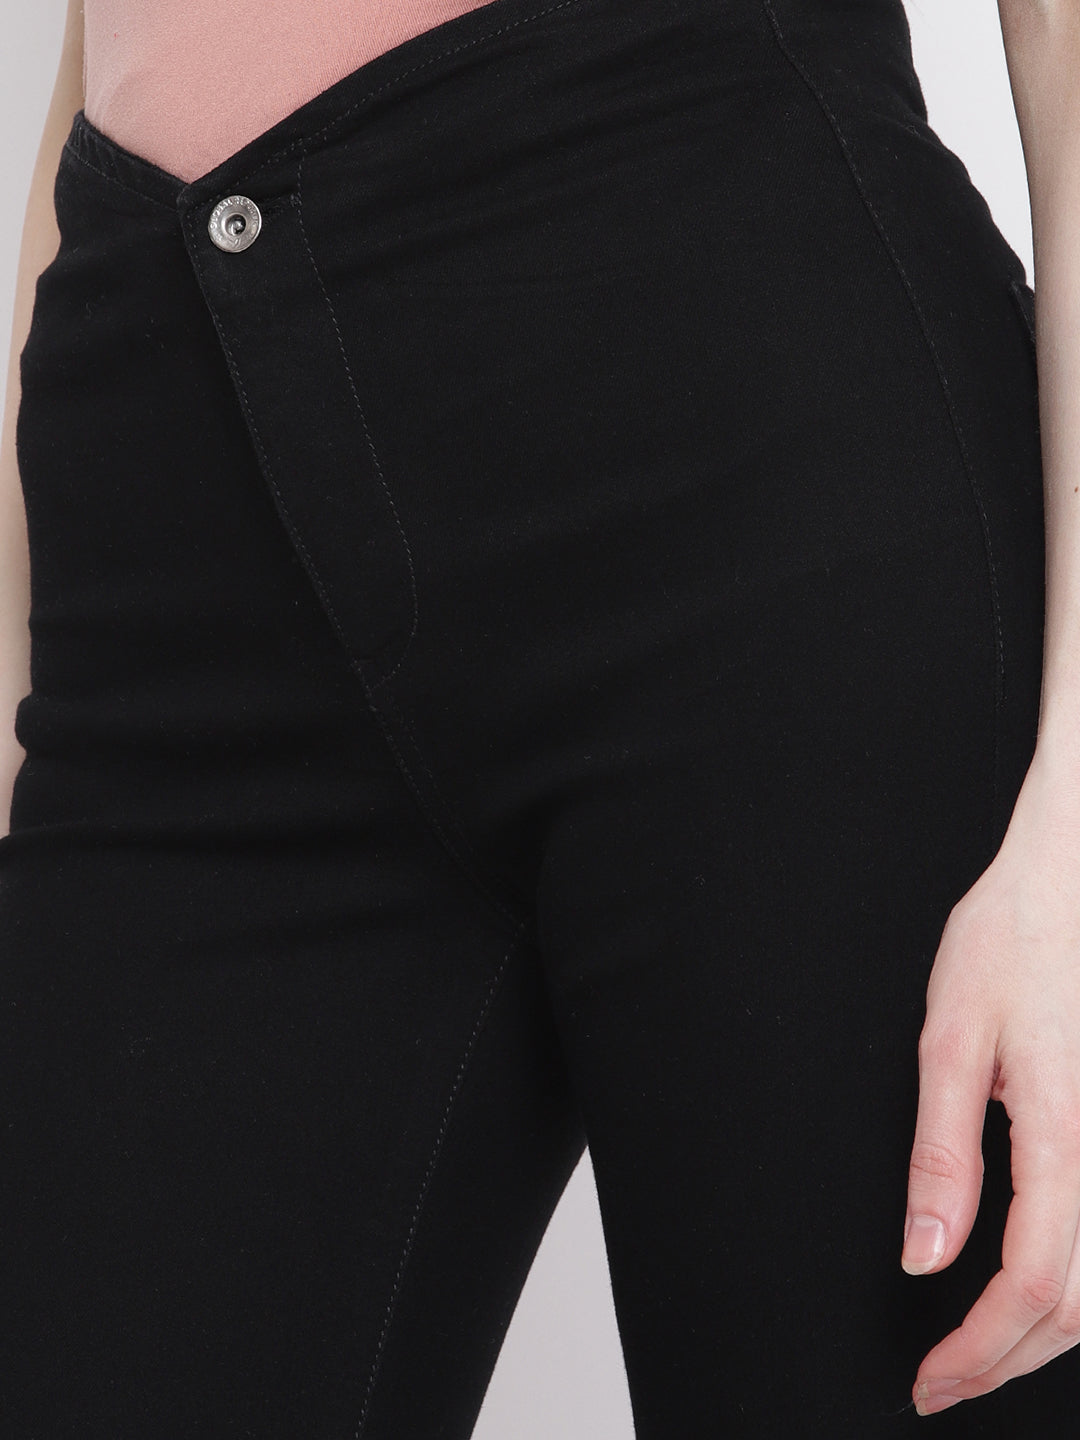 Buy Black High Rise Skinny Jeans For Women - ONLY